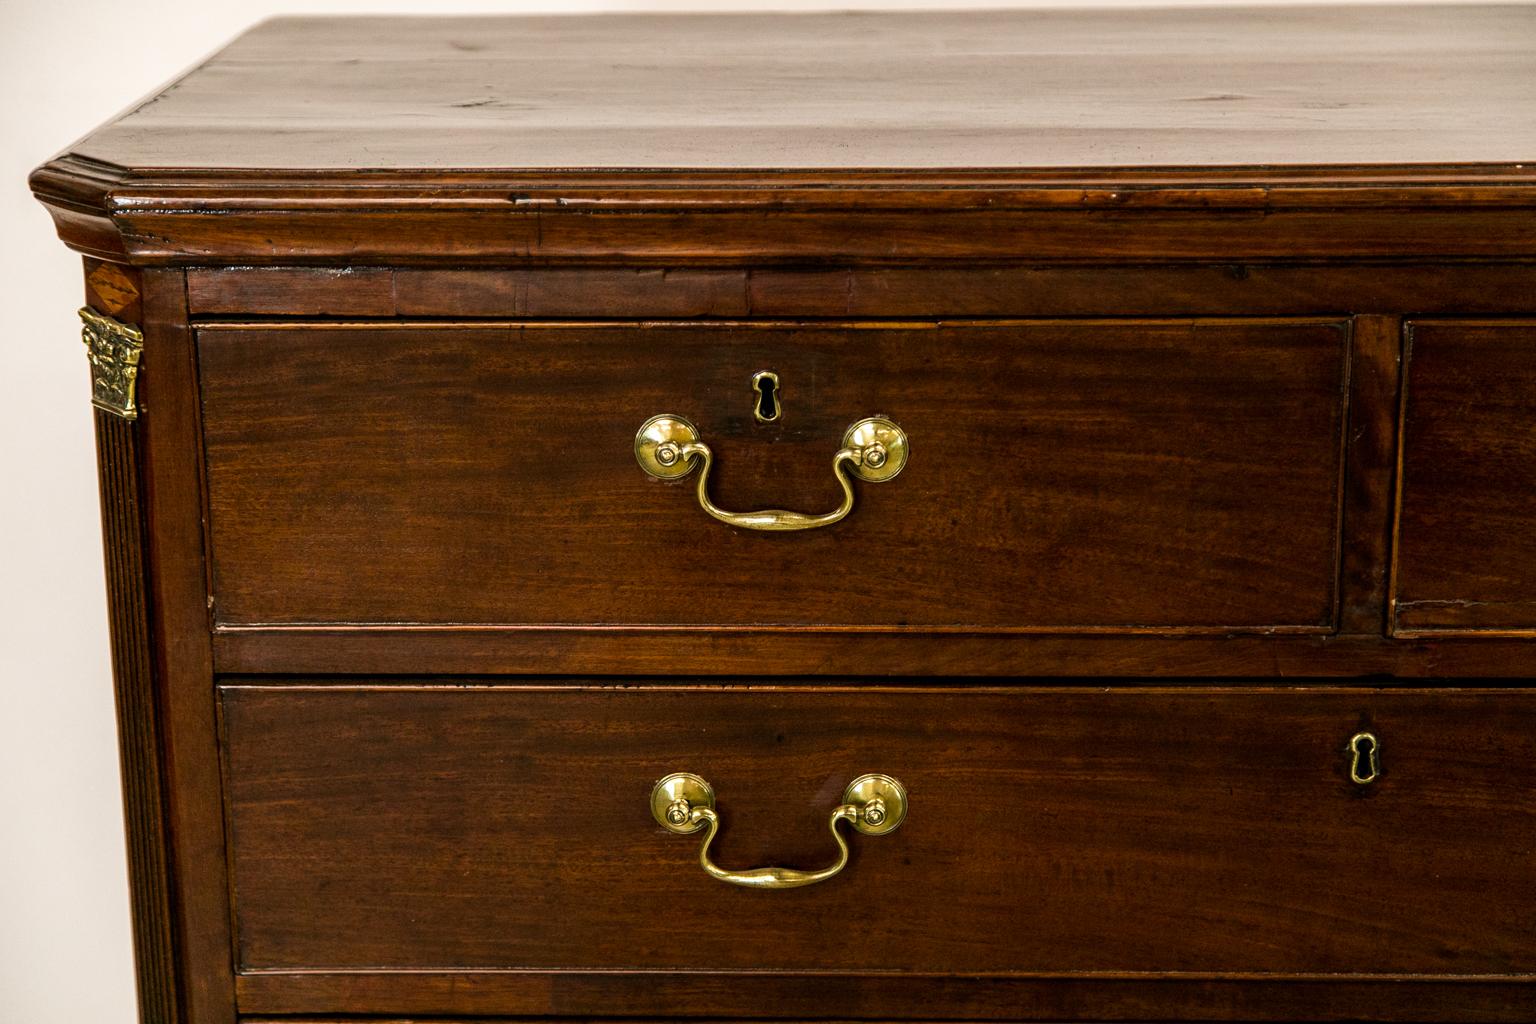 This English mahogany chest has two drawers over four drawer graduated drawers, fluted chamfered corners with the original Corinthian brass capitals and Ogee bracket feet. The ''Swan neck'' hardware is original.